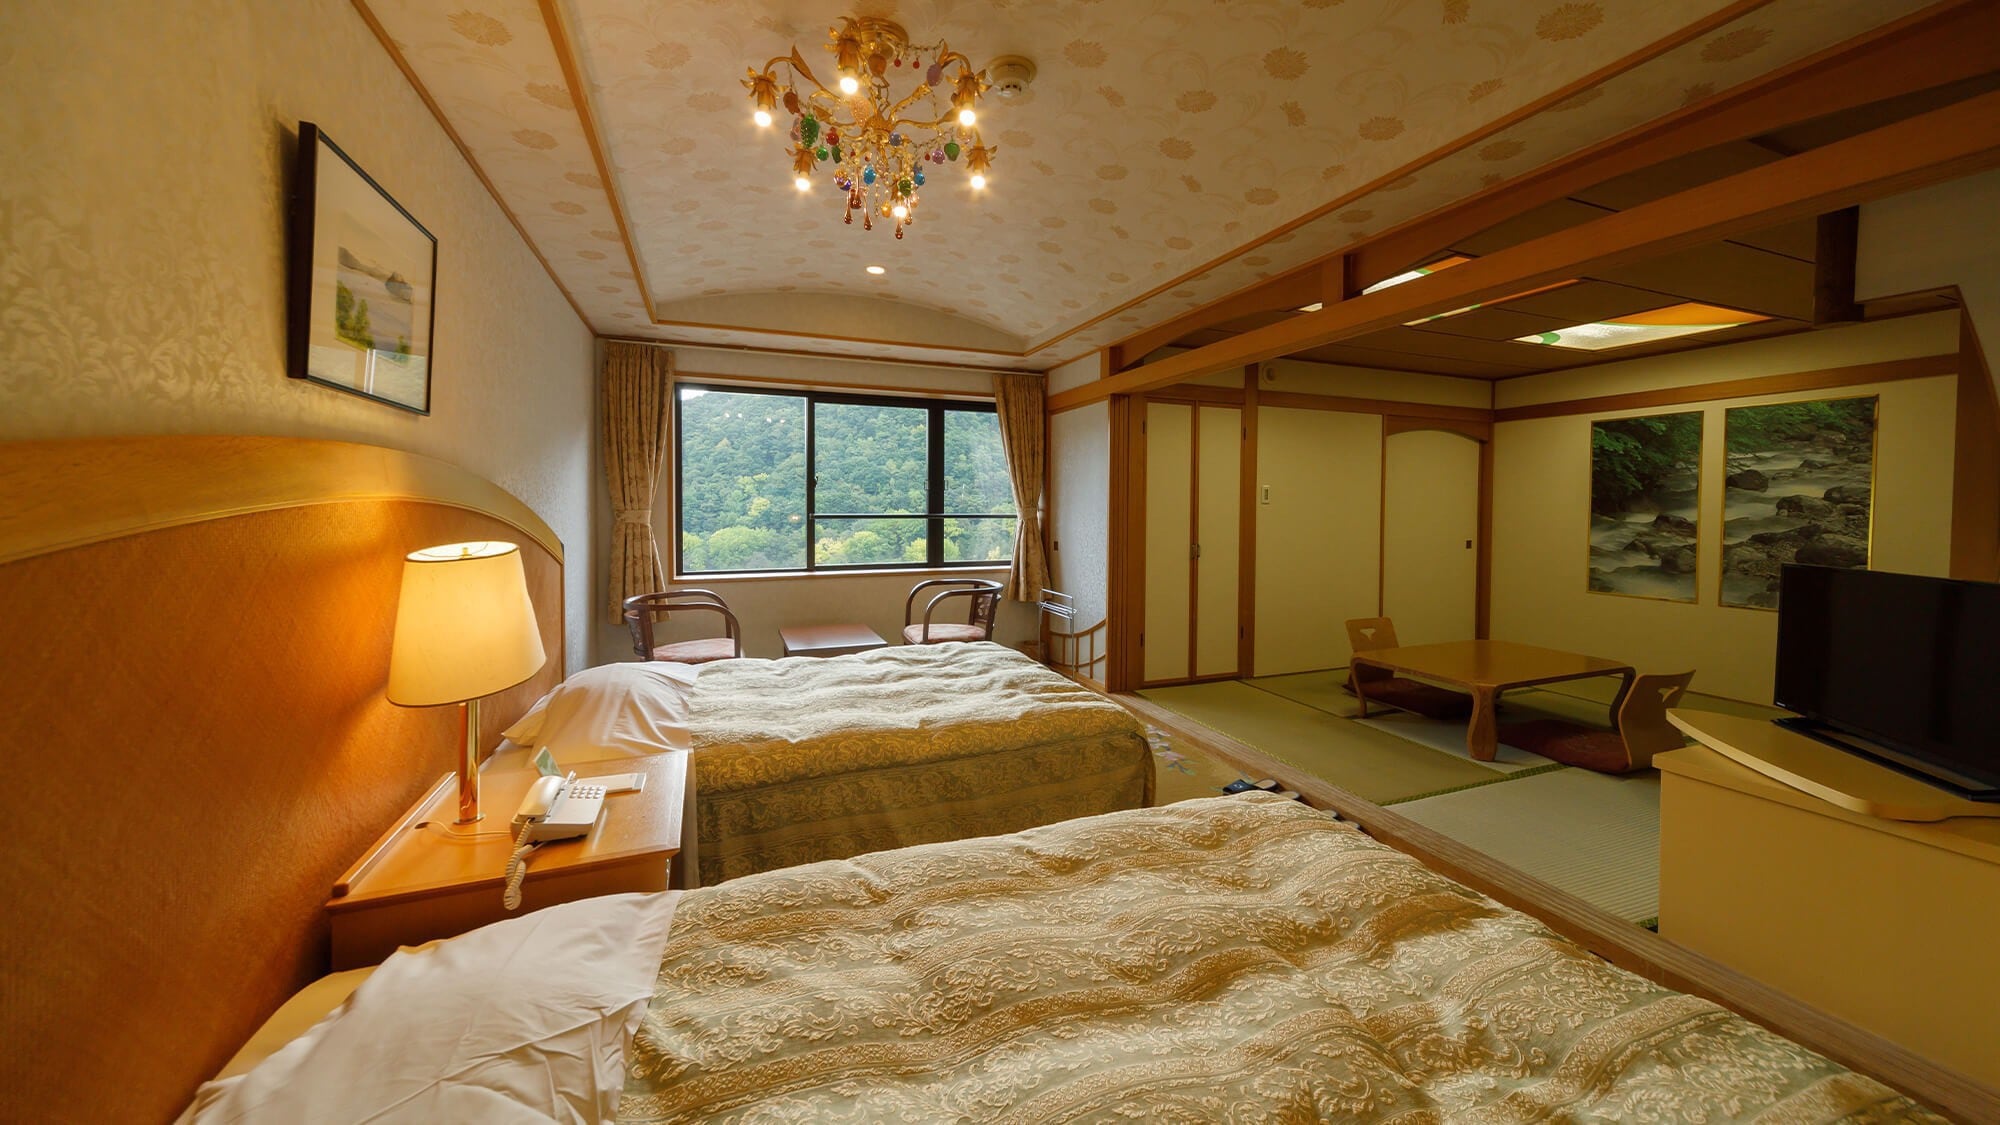 [Main Building] Japanese-Western style room (Japanese-style room 6 tatami mats + 2 beds) / 6 tatami mats Japanese-style room + twin-bed Japanese-Western style room.